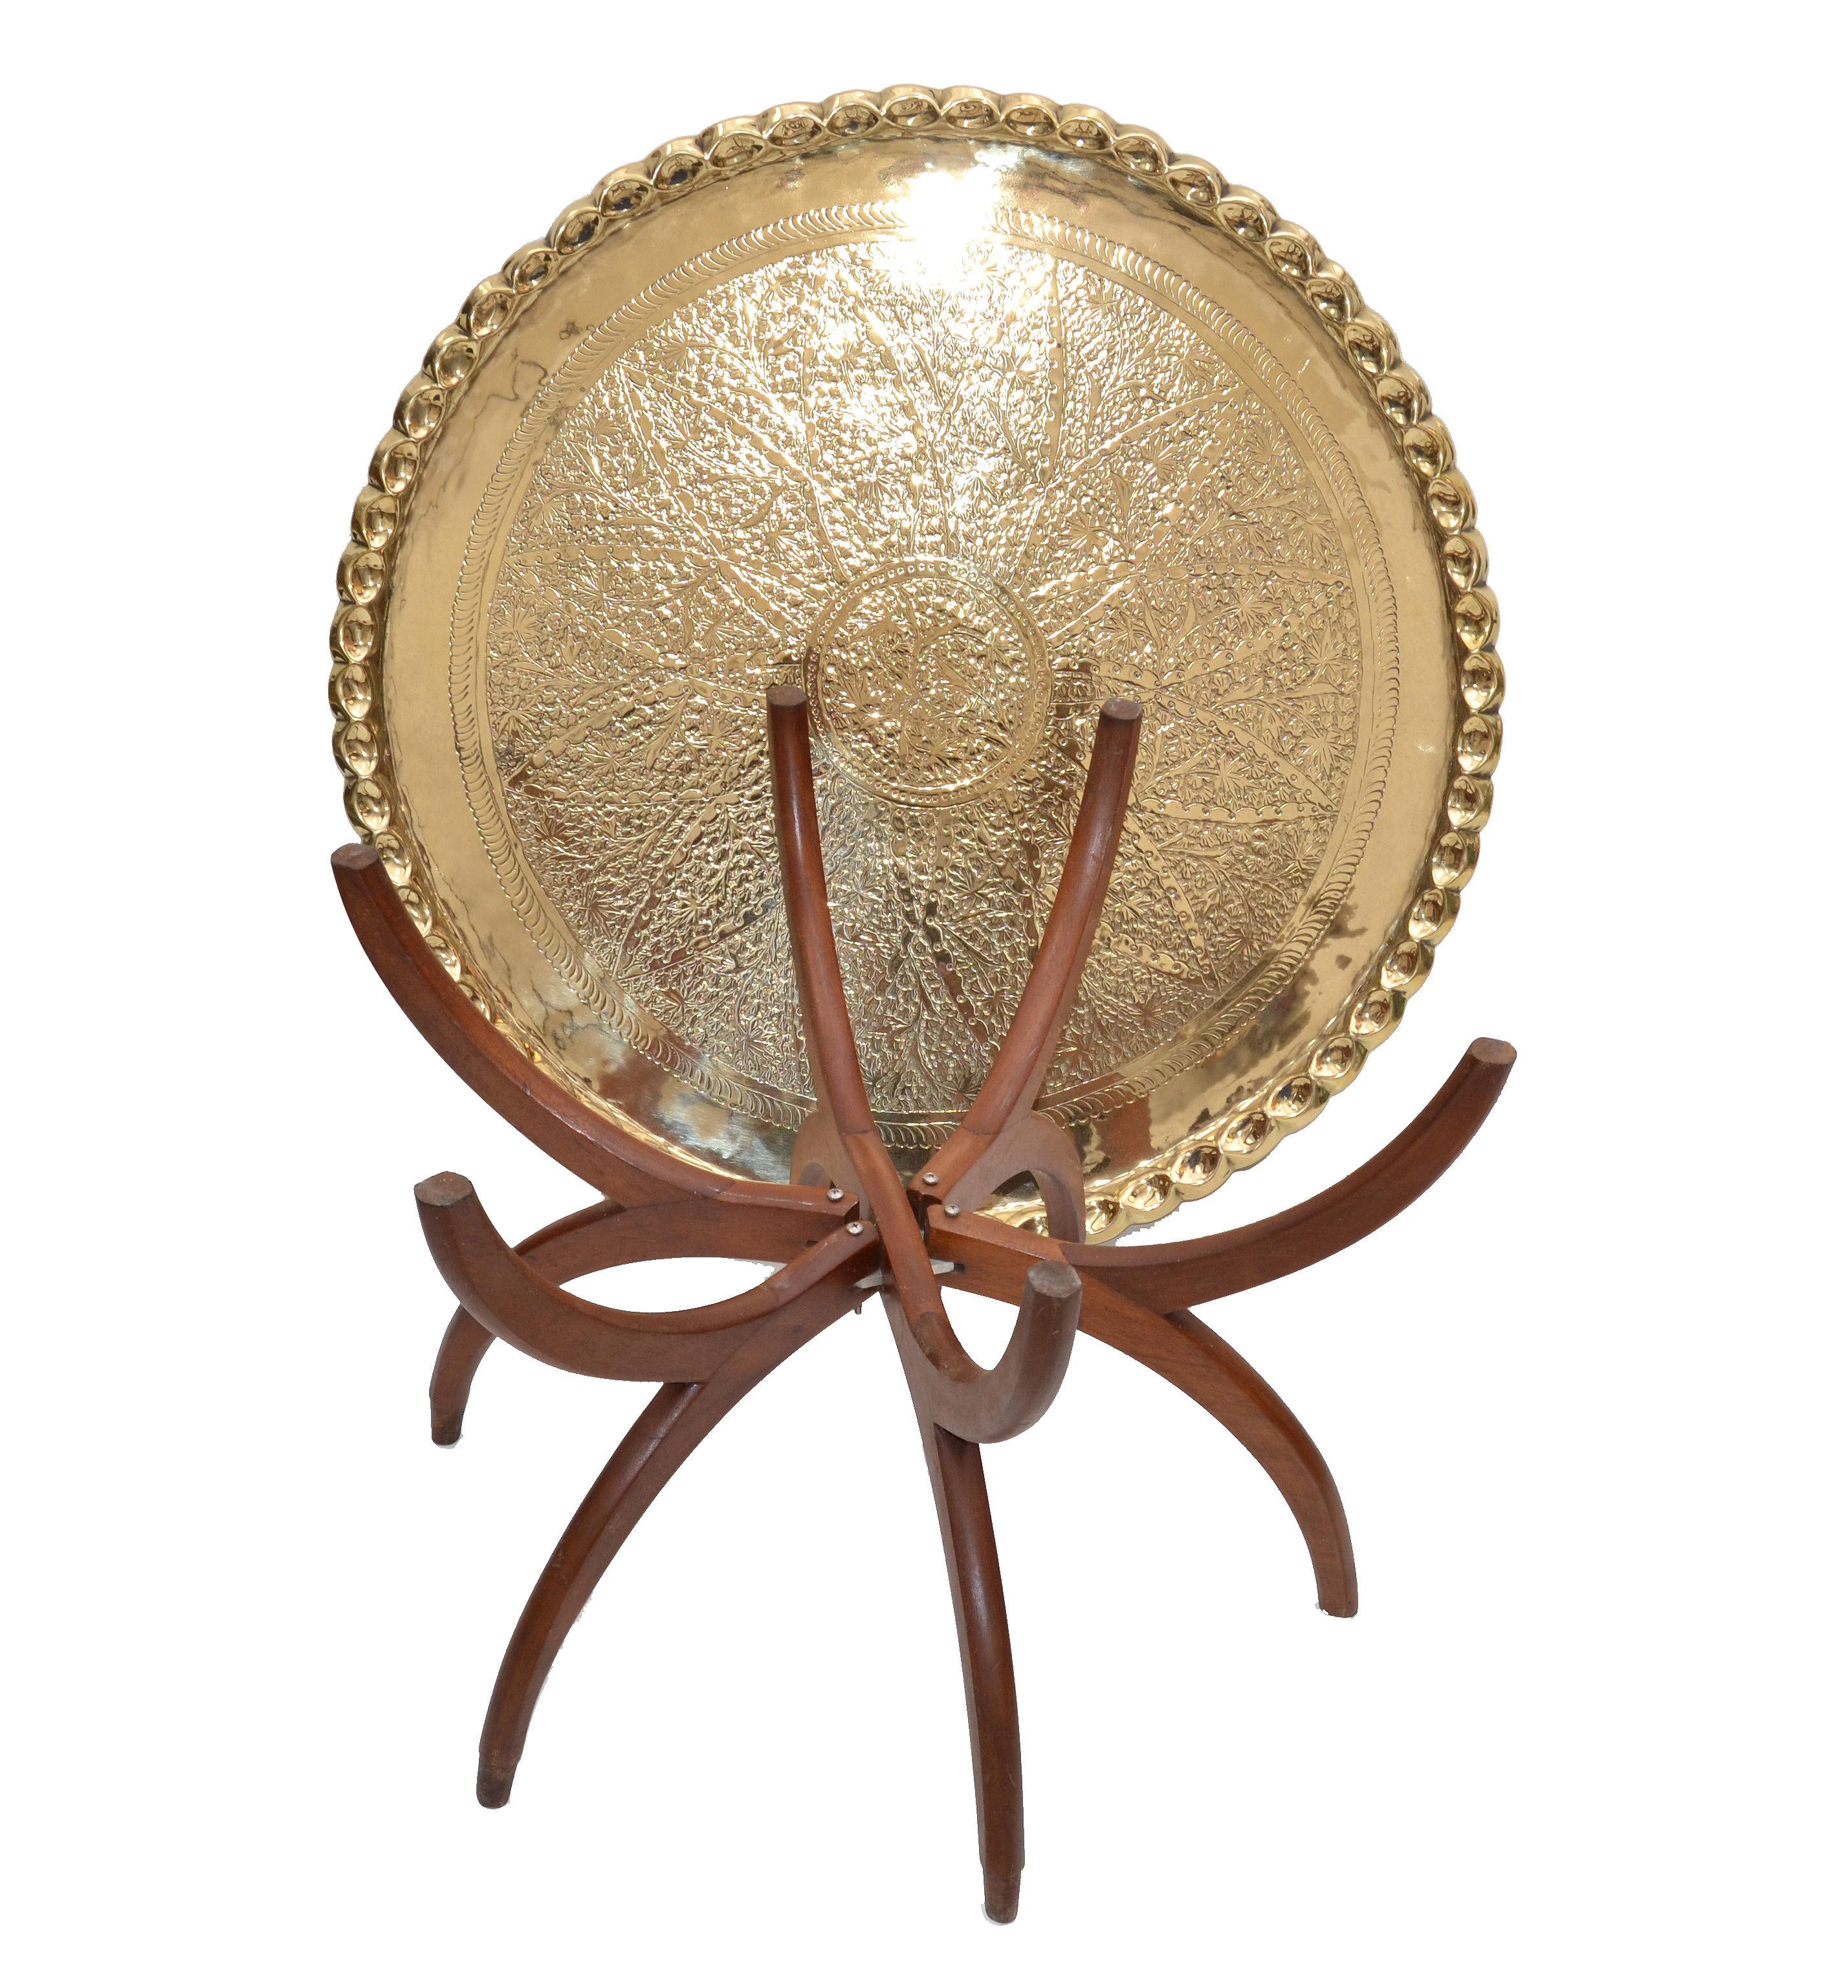 Danish Mid-Century Modern Round Walnut Spider Leg and Bronze Moroccan Tray Coffee Table For Sale